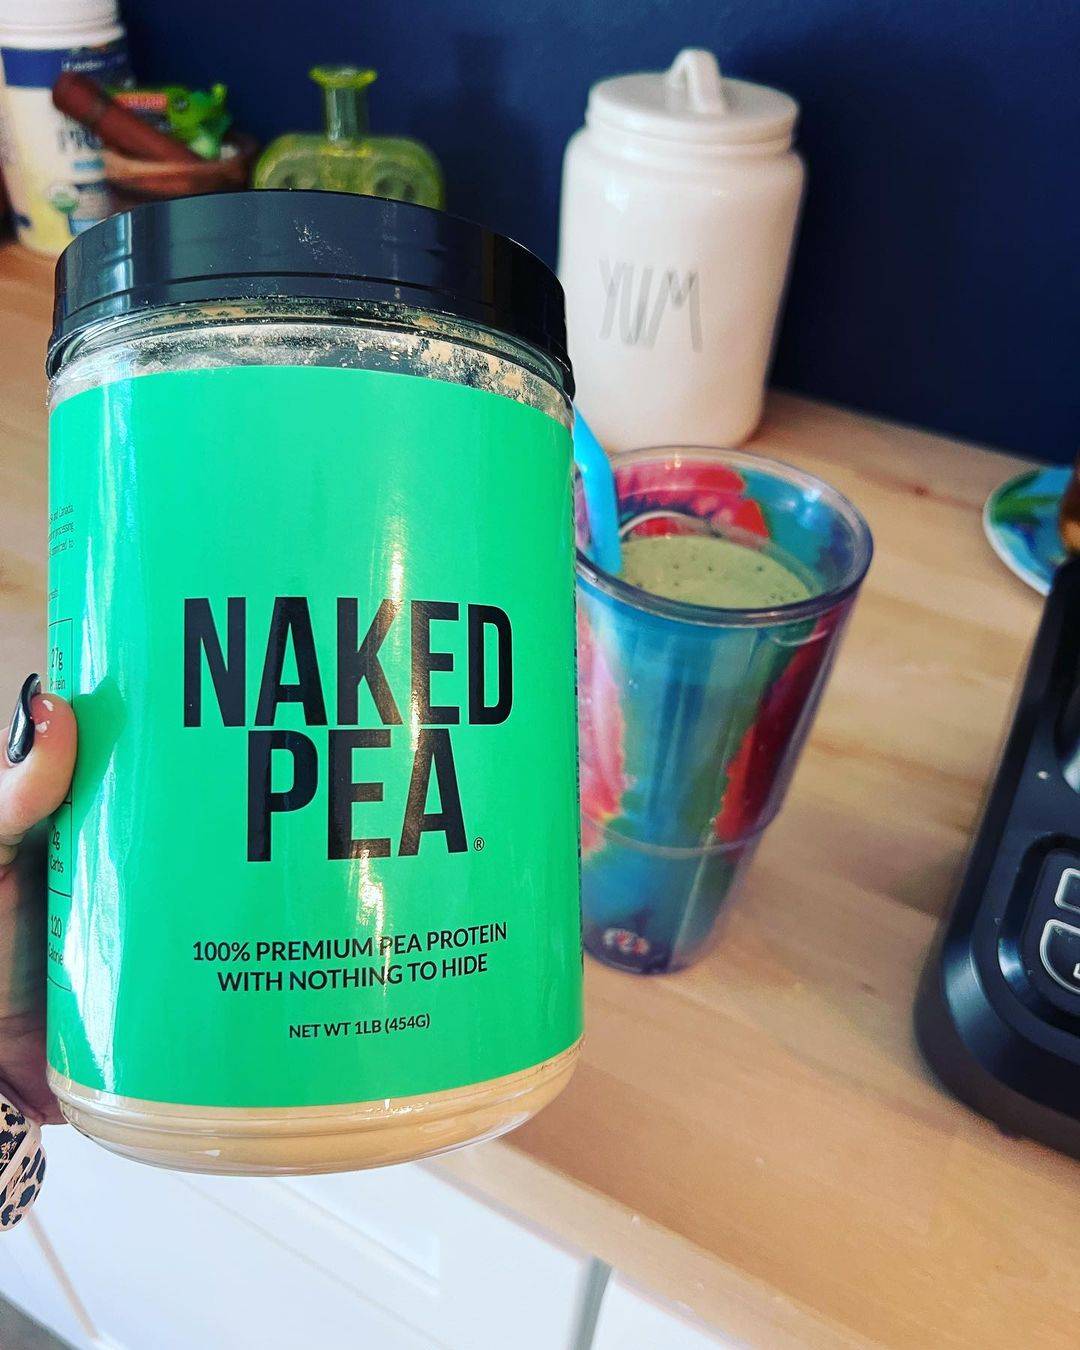 Performing Naked Pea Protein